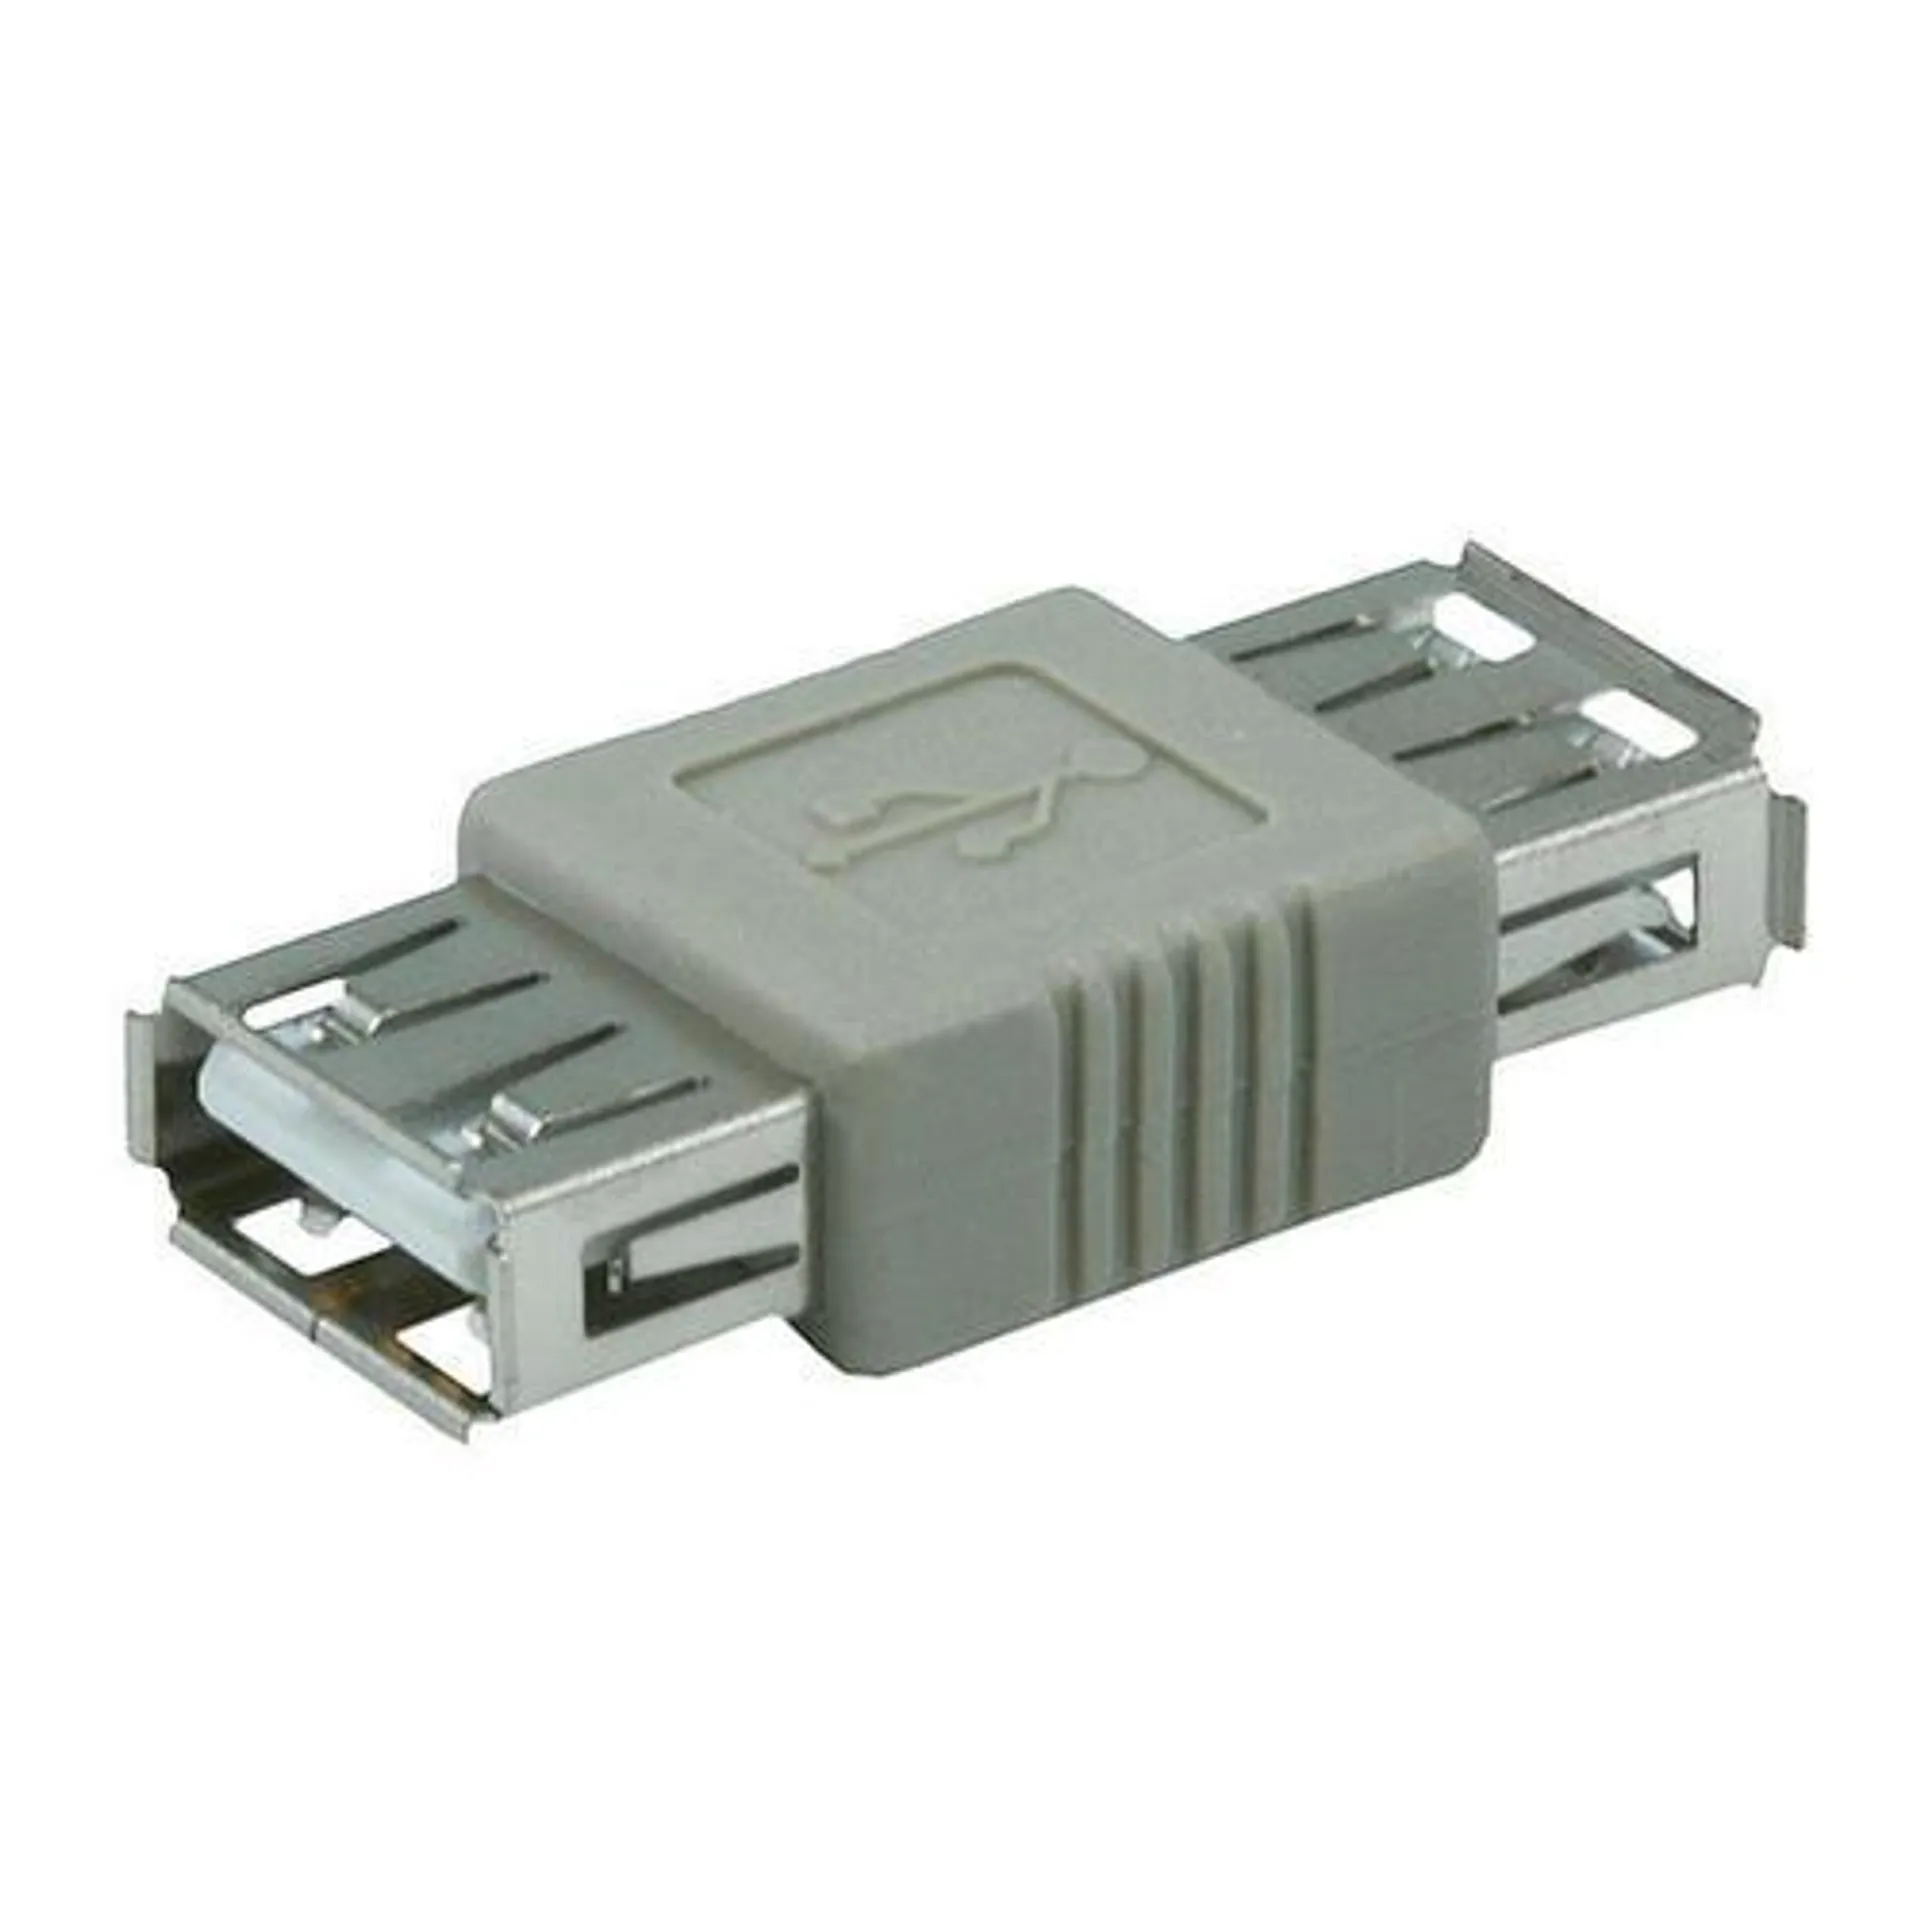 USB 2.0 A Female to A Female Coupler Adapter - PrimeCables®